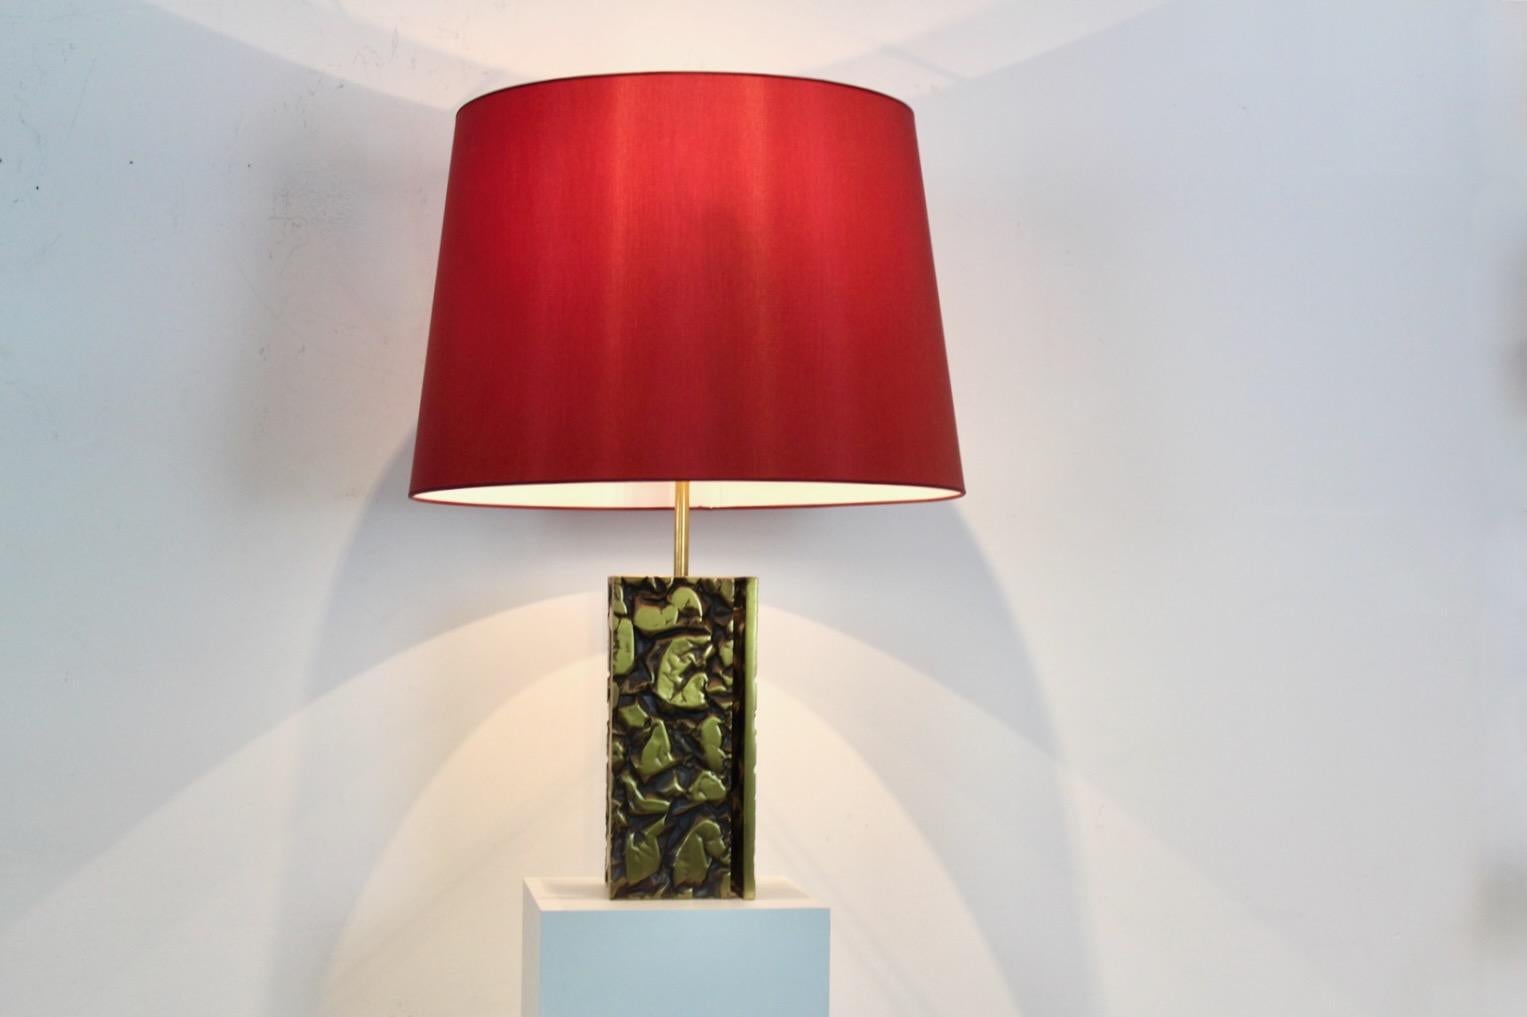 Expressive Brutalist table lamp made in France in the 1970s. Beautiful Heavy and Large lamp base with Bold Abstract Brass Sculptured accents. Comes with a matching shade. Very good vintage condition with normal wear. Beautiful lighting effect.